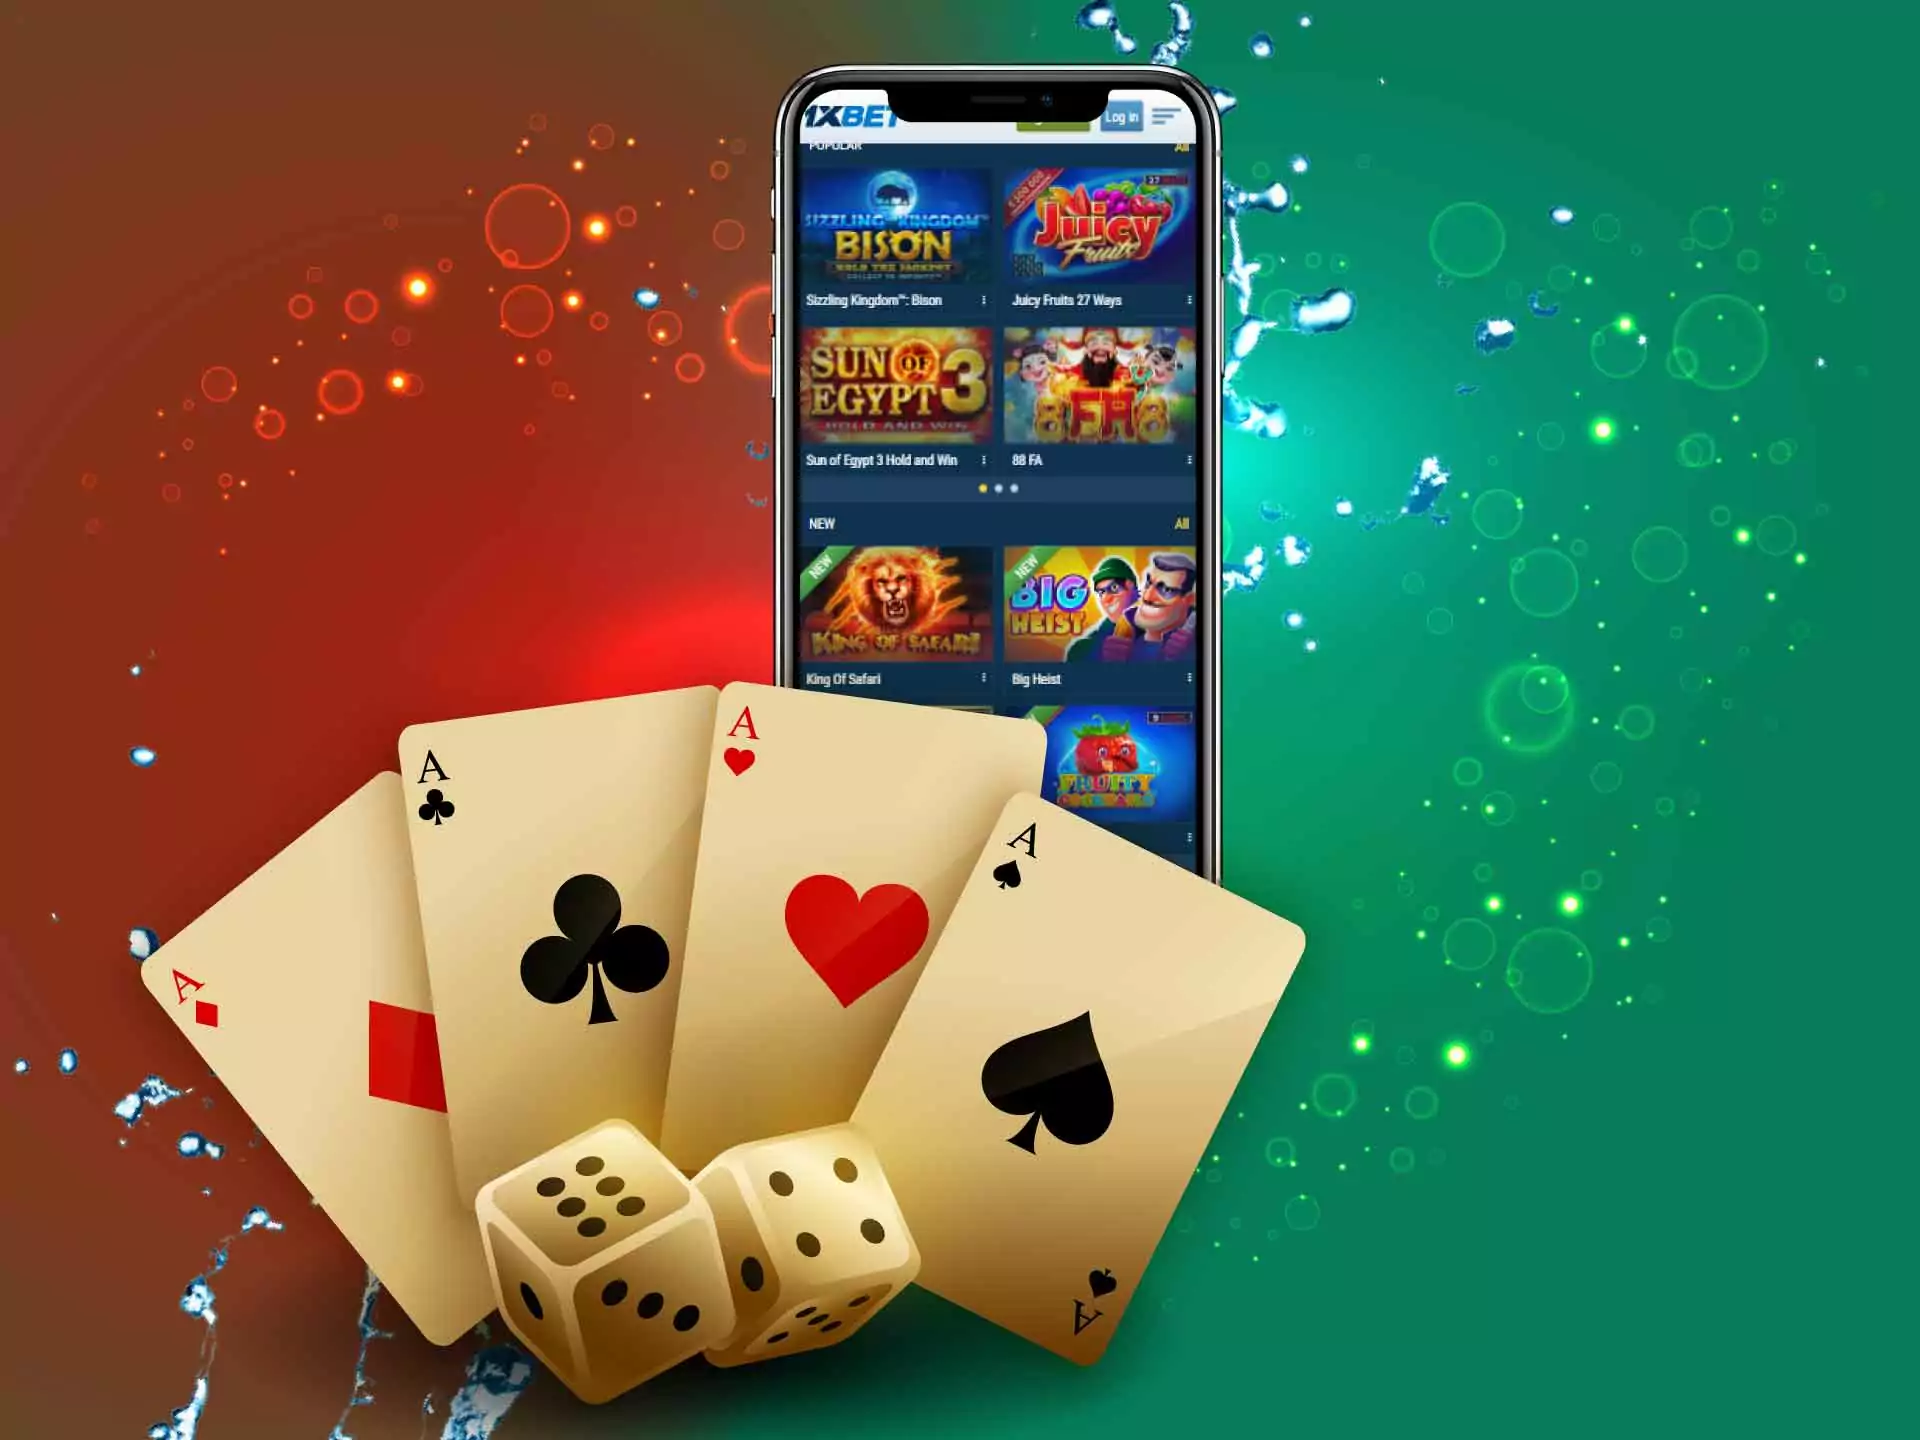 There are a lot of various casino games in the 1xBet app.